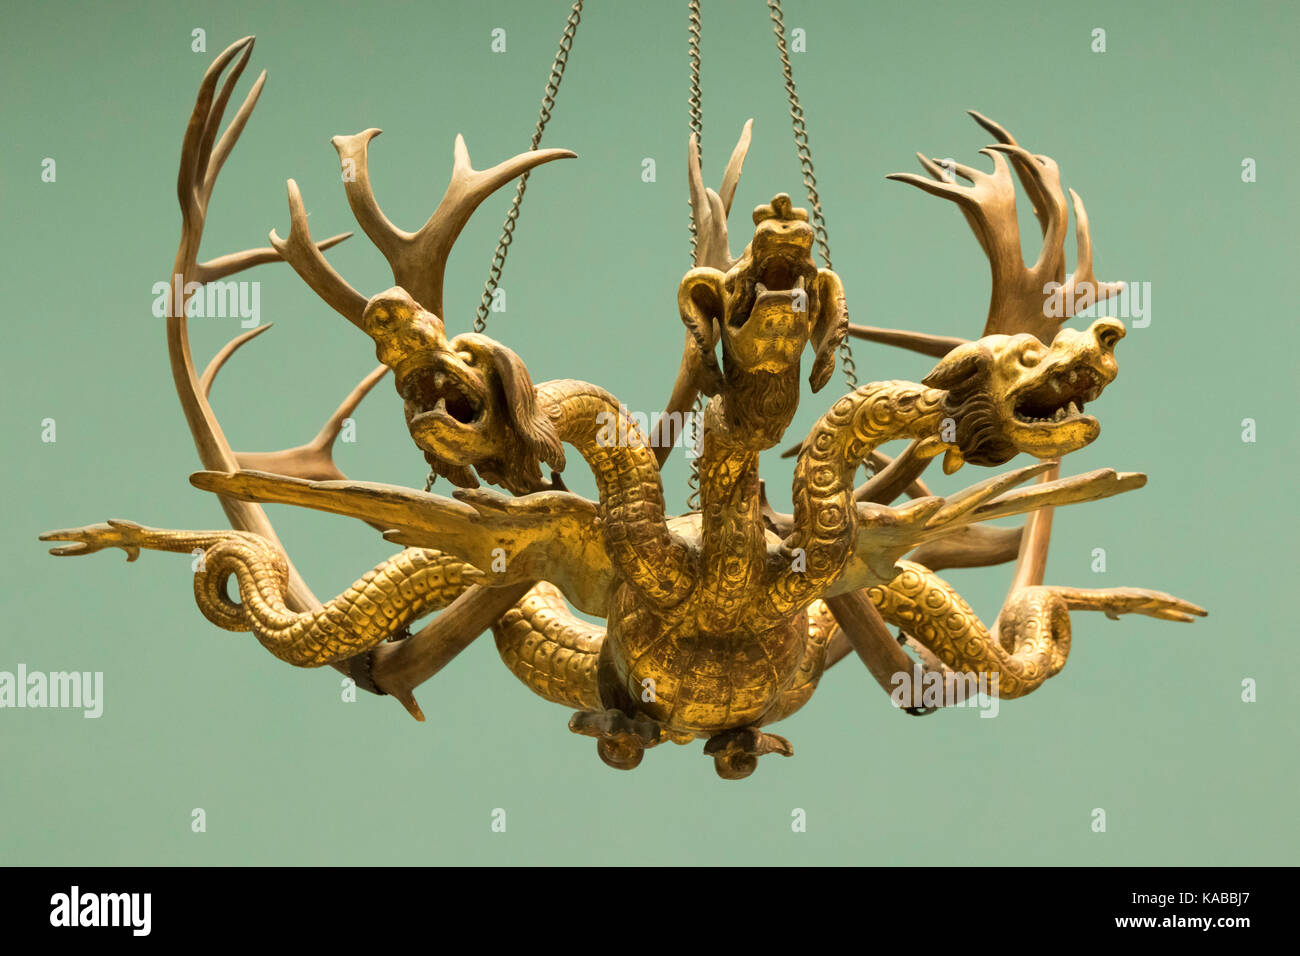 Antler chandelier (1522) in the shape of a dragon by Veit Stoss after a drawing by Durer, German National Museum, Nuremberg, Bavaria, Germany Stock Photo